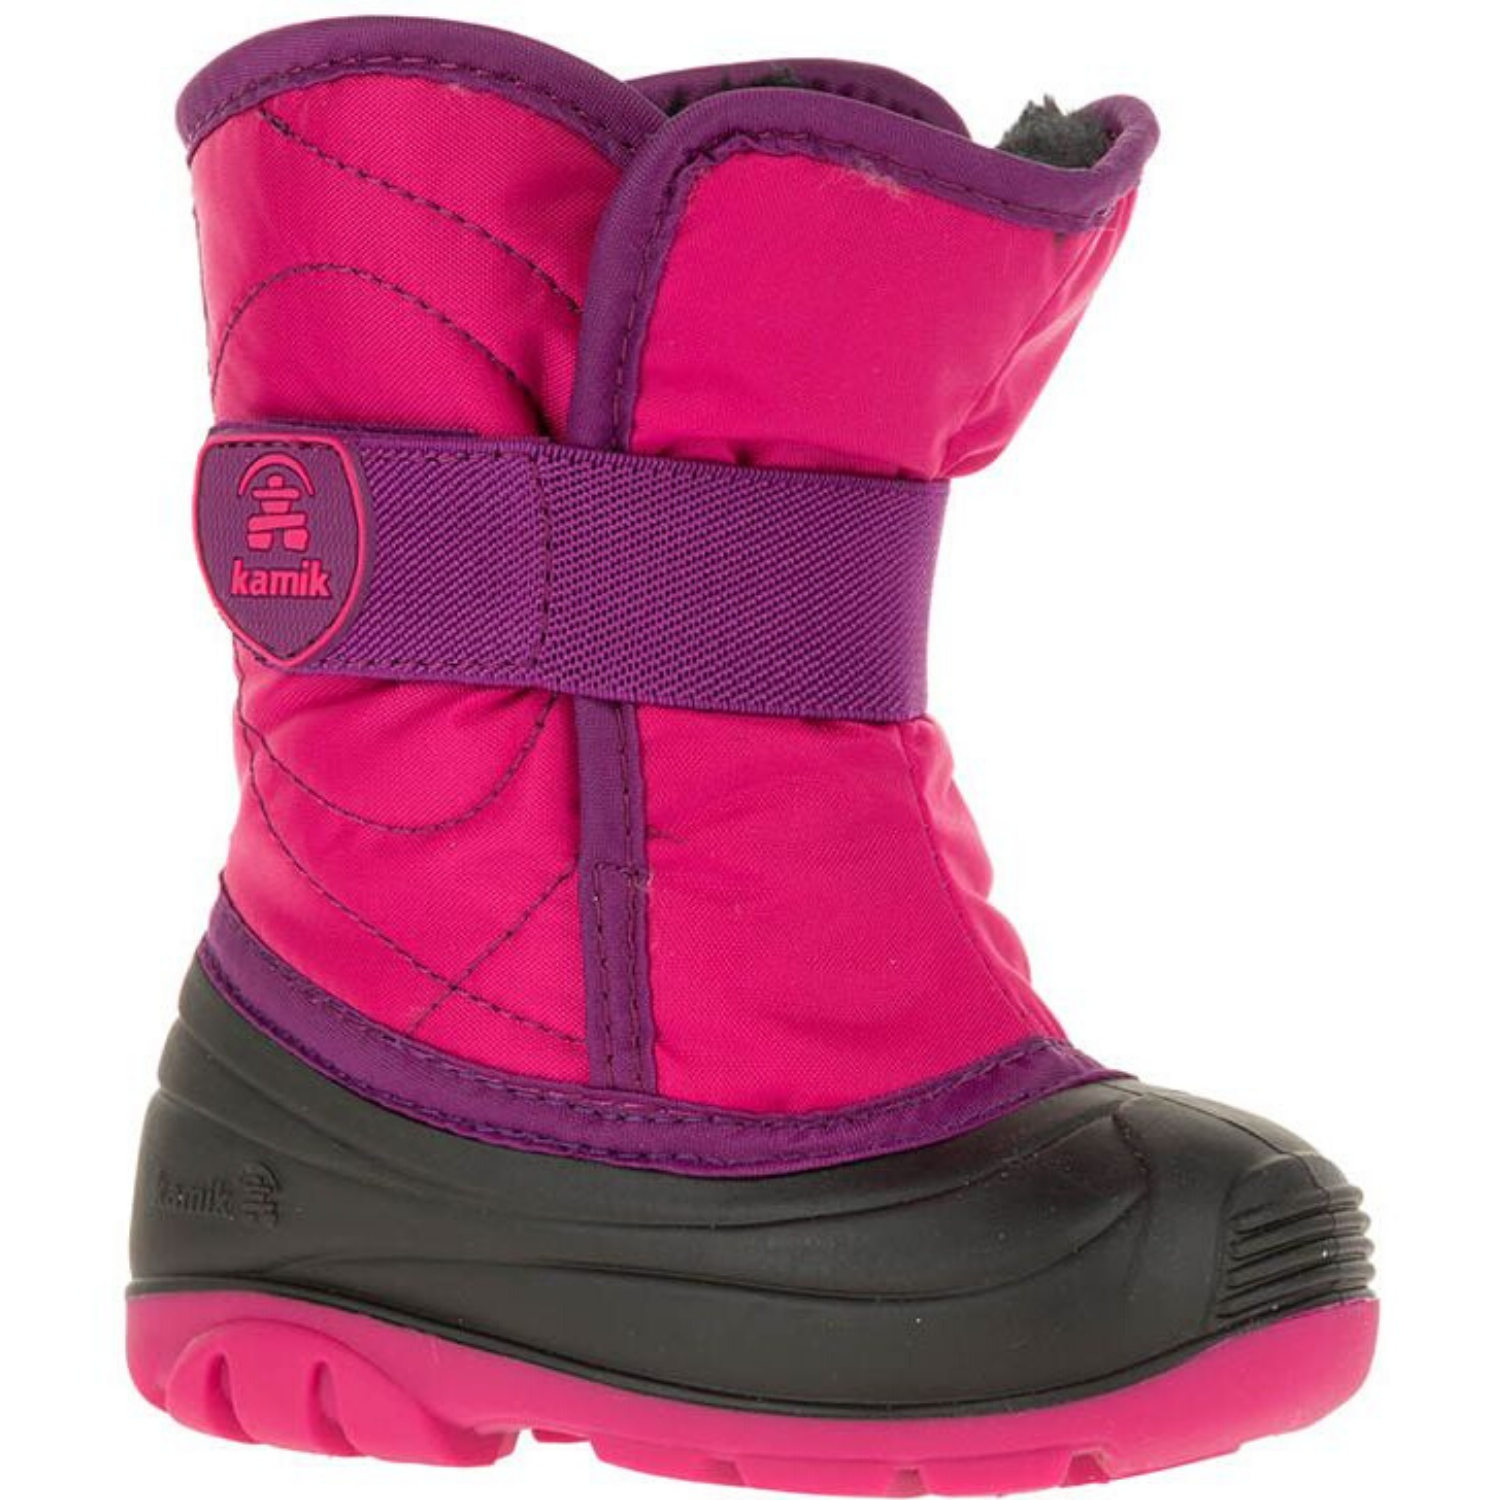 kamik youth boots